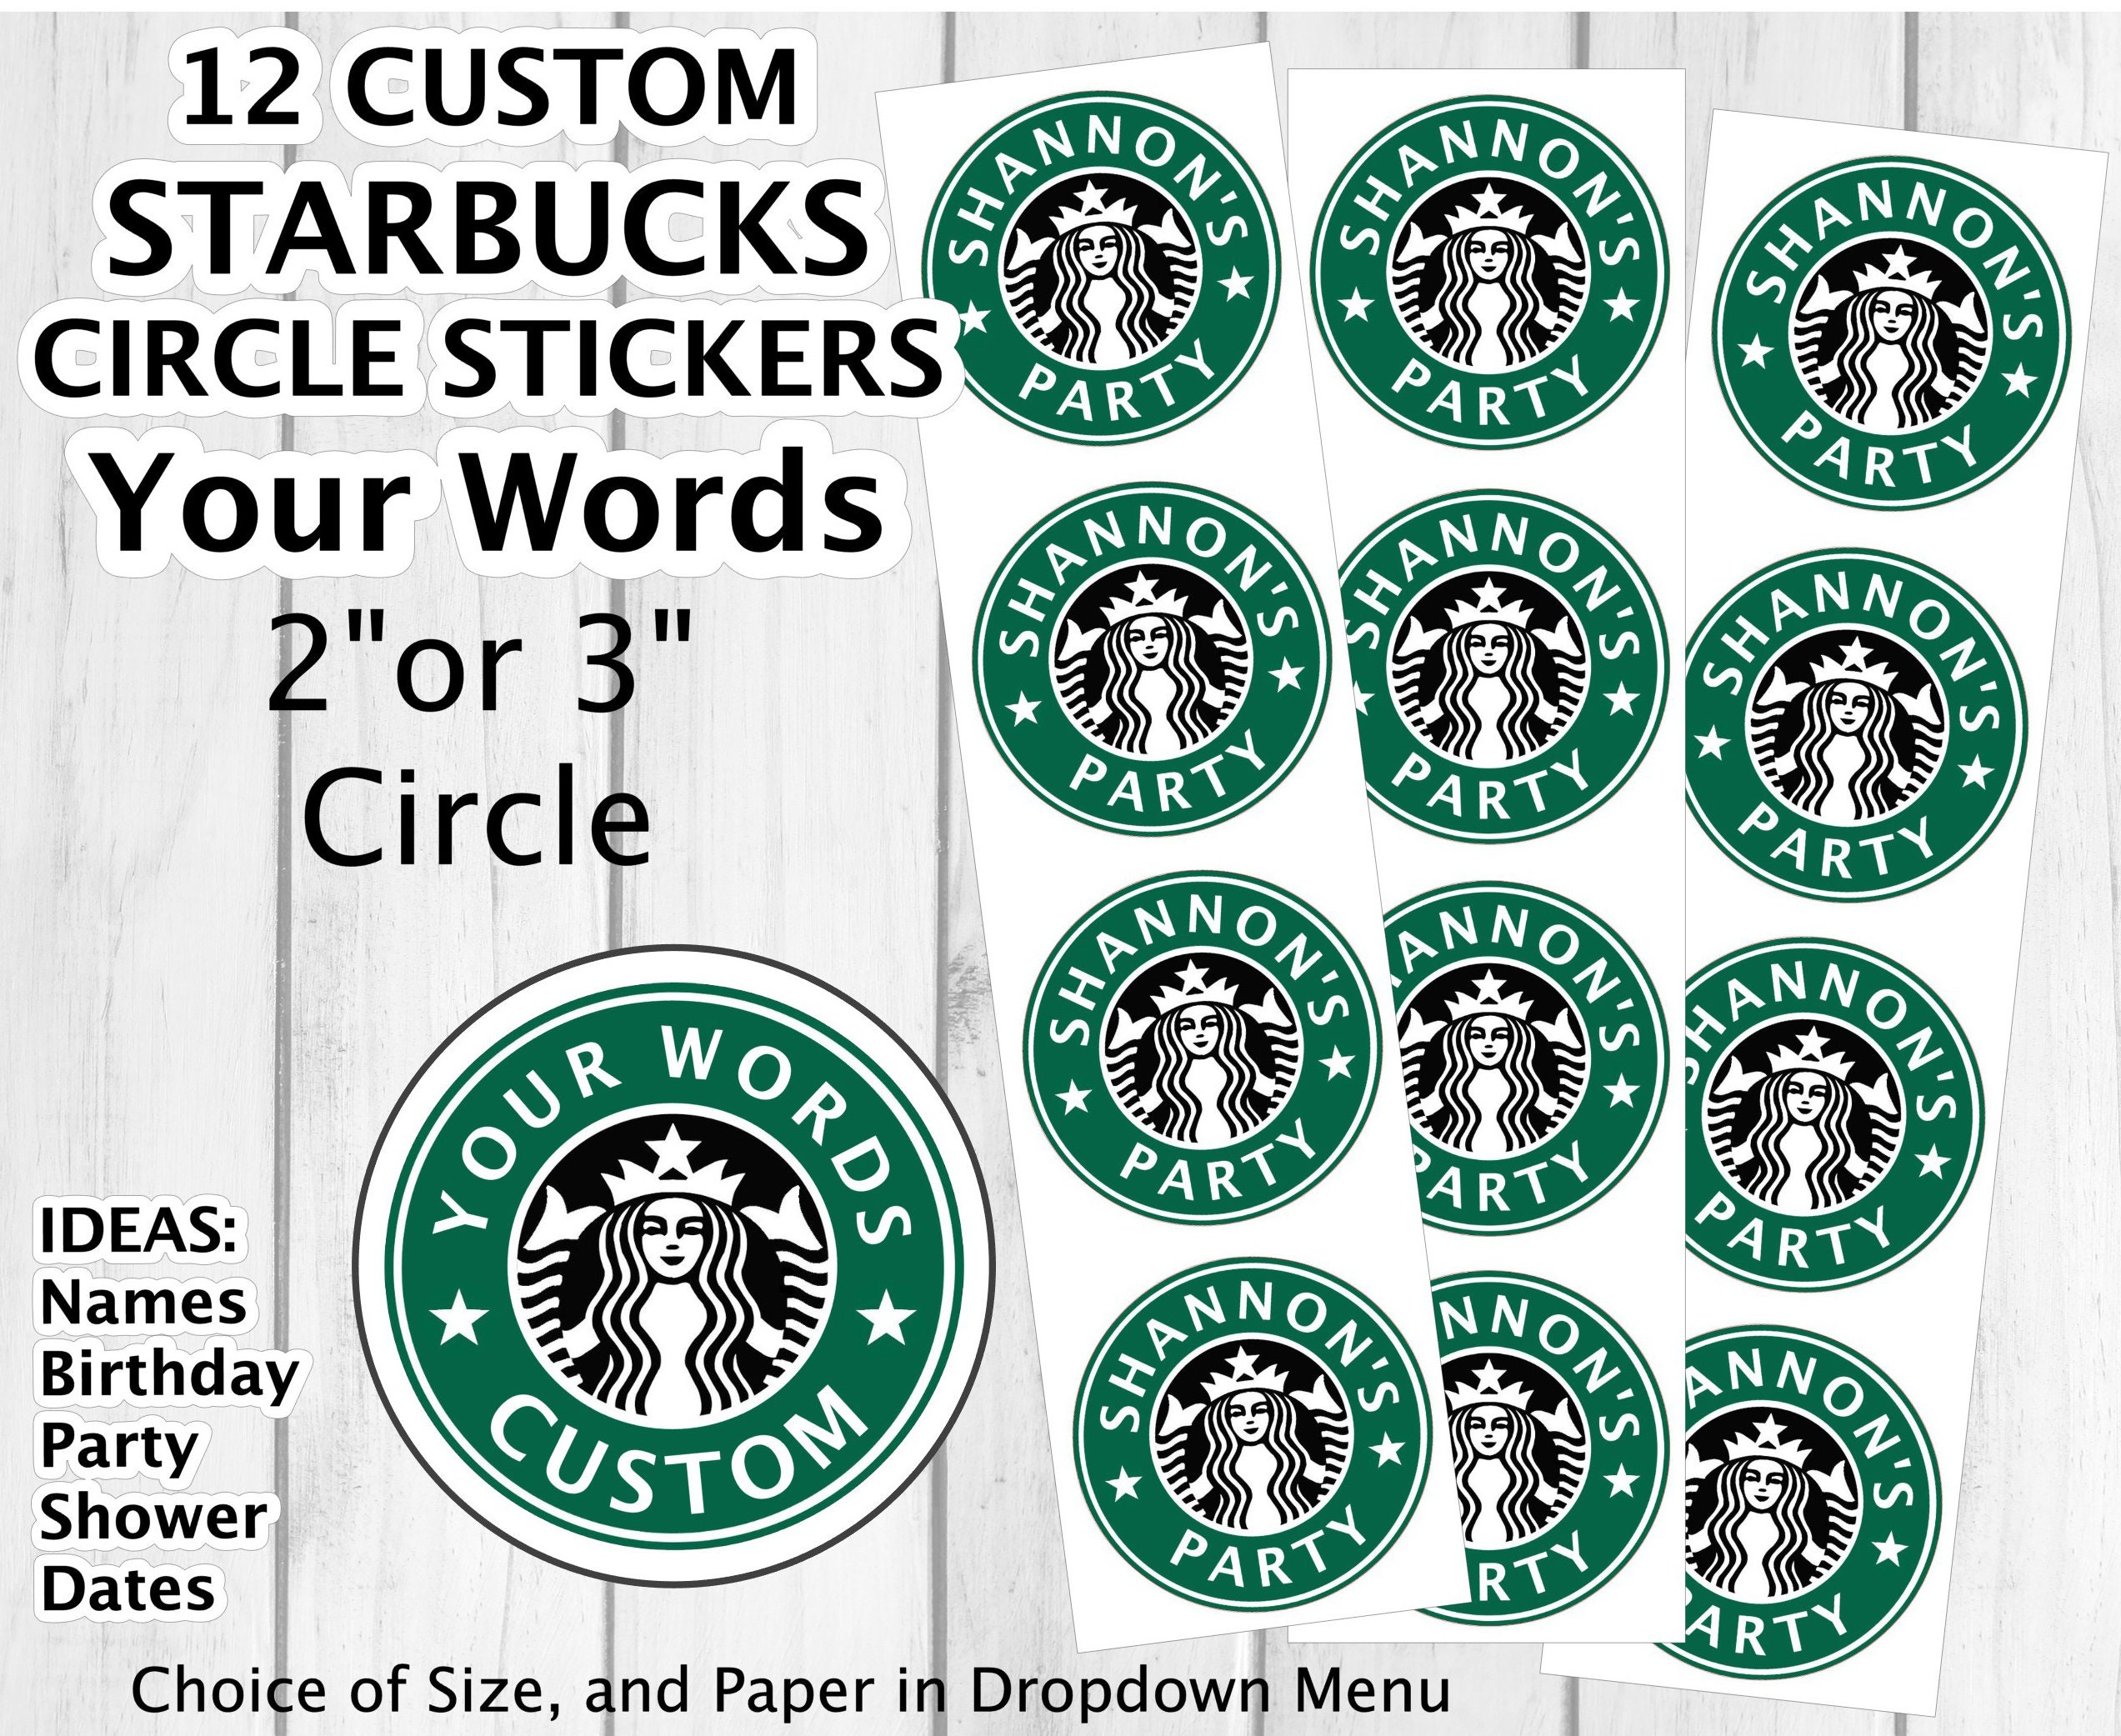 Coffee sizes (for a project/idea)  Starbucks cup sizes, Starbucks